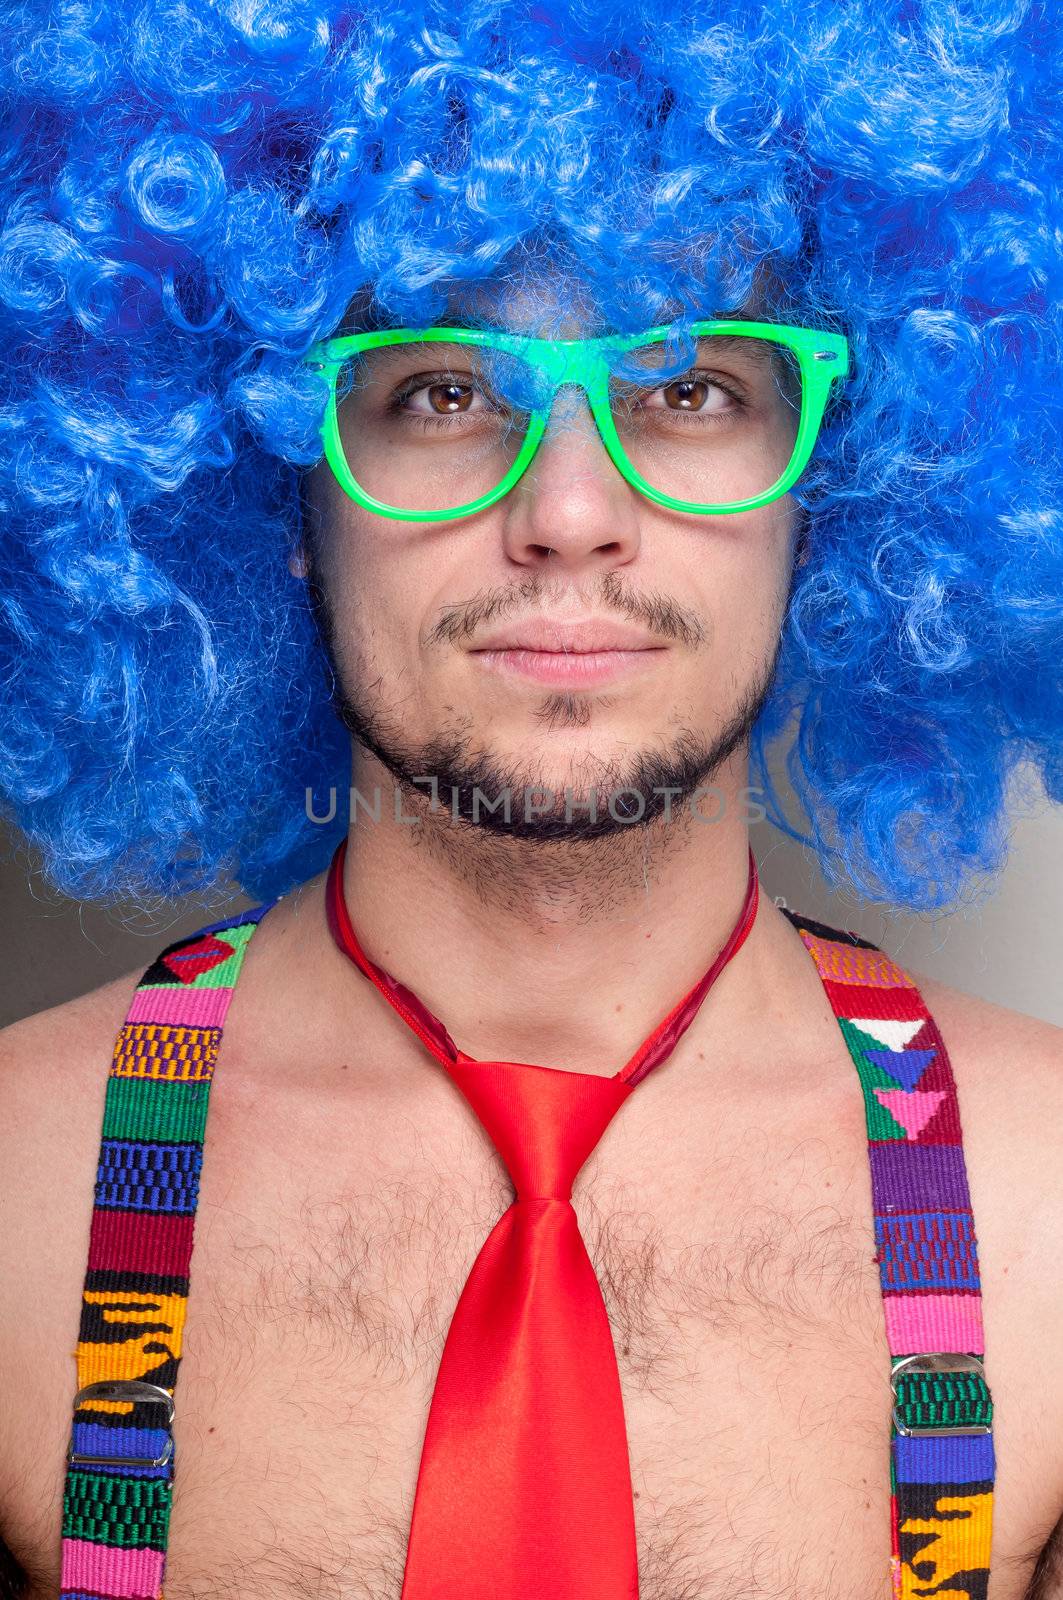 Funny guy naked with blue wig and red tie by peus